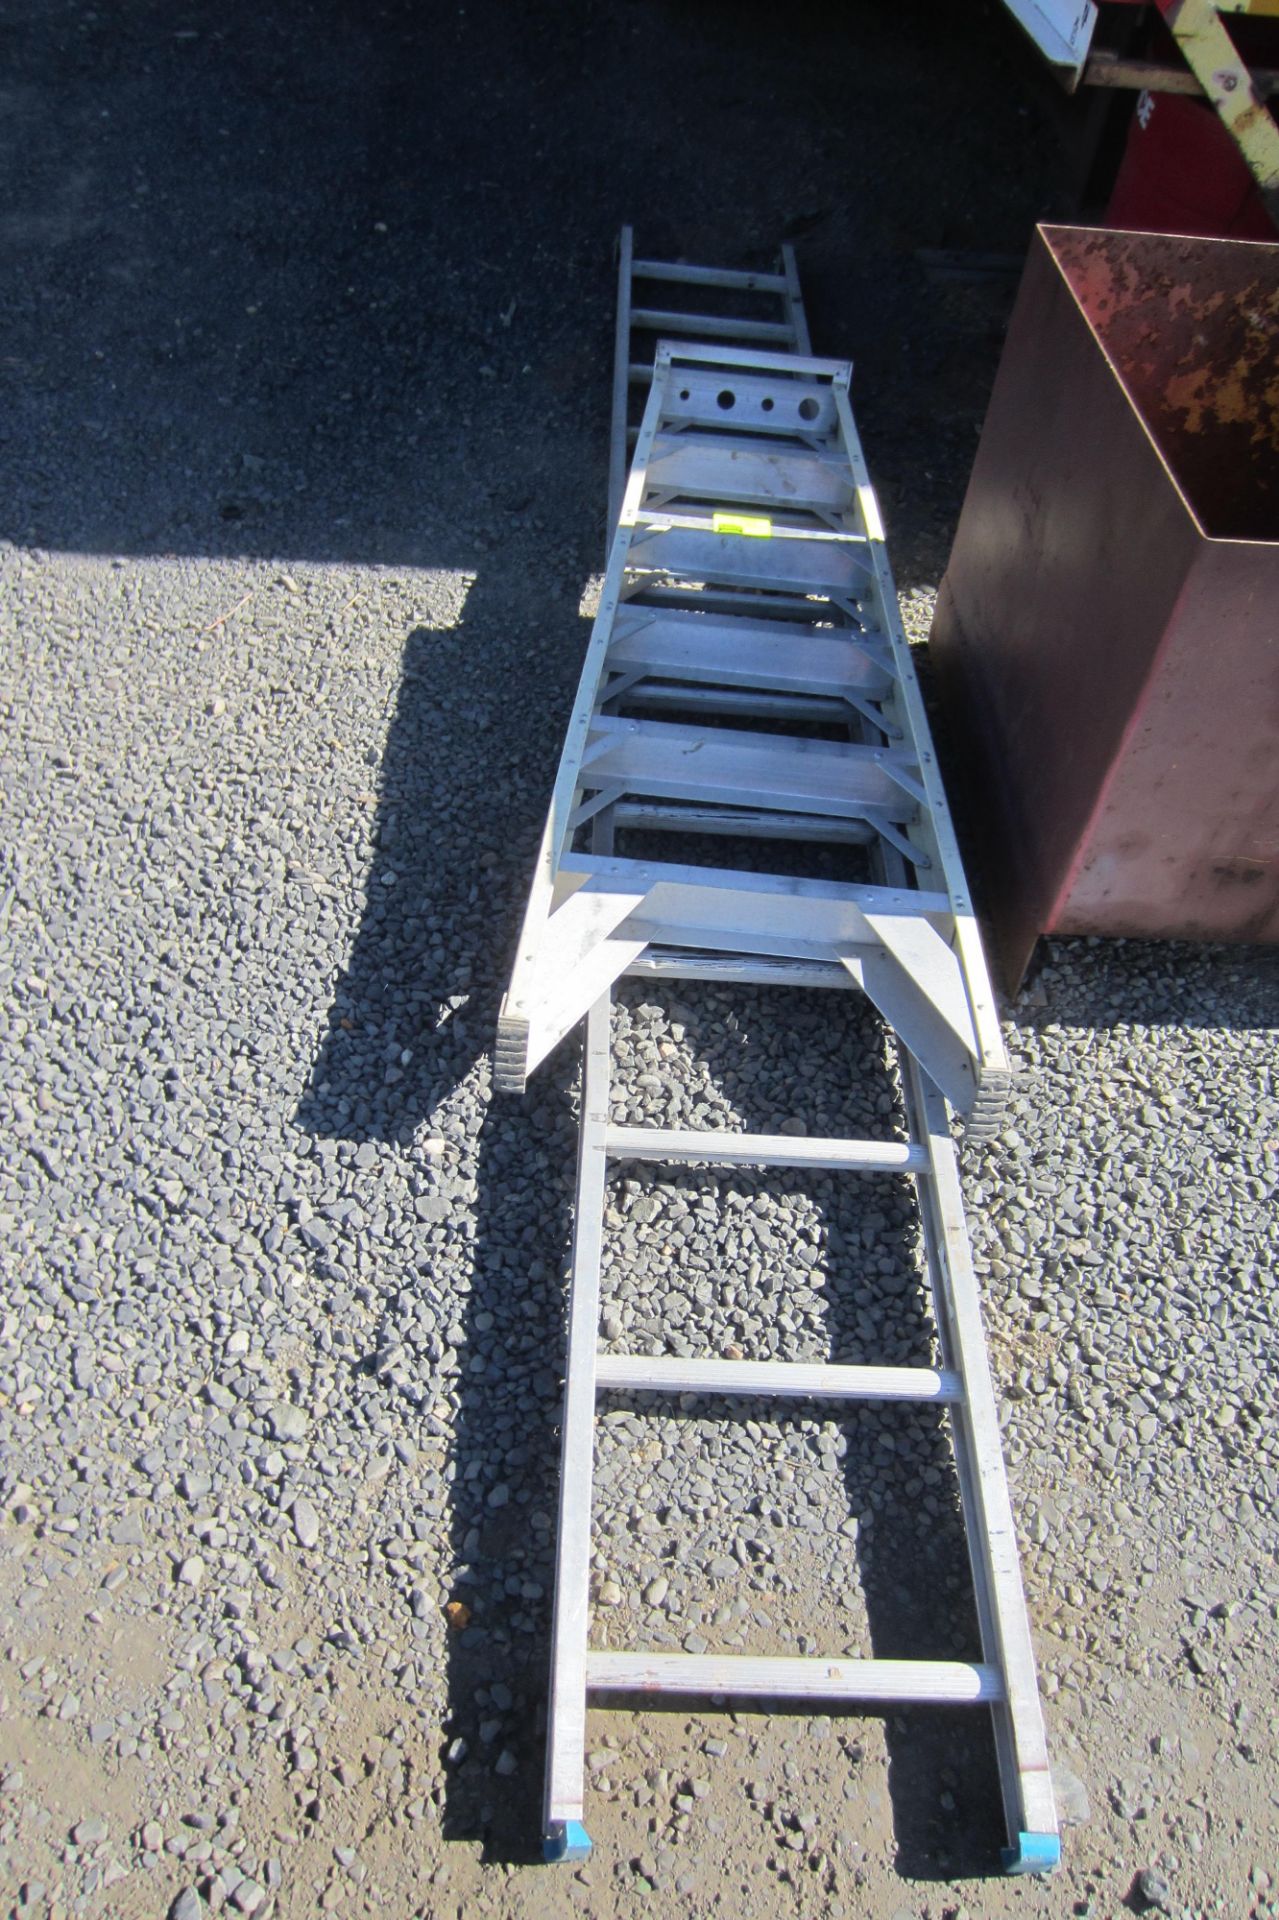 (2) LADDER SECTIONS